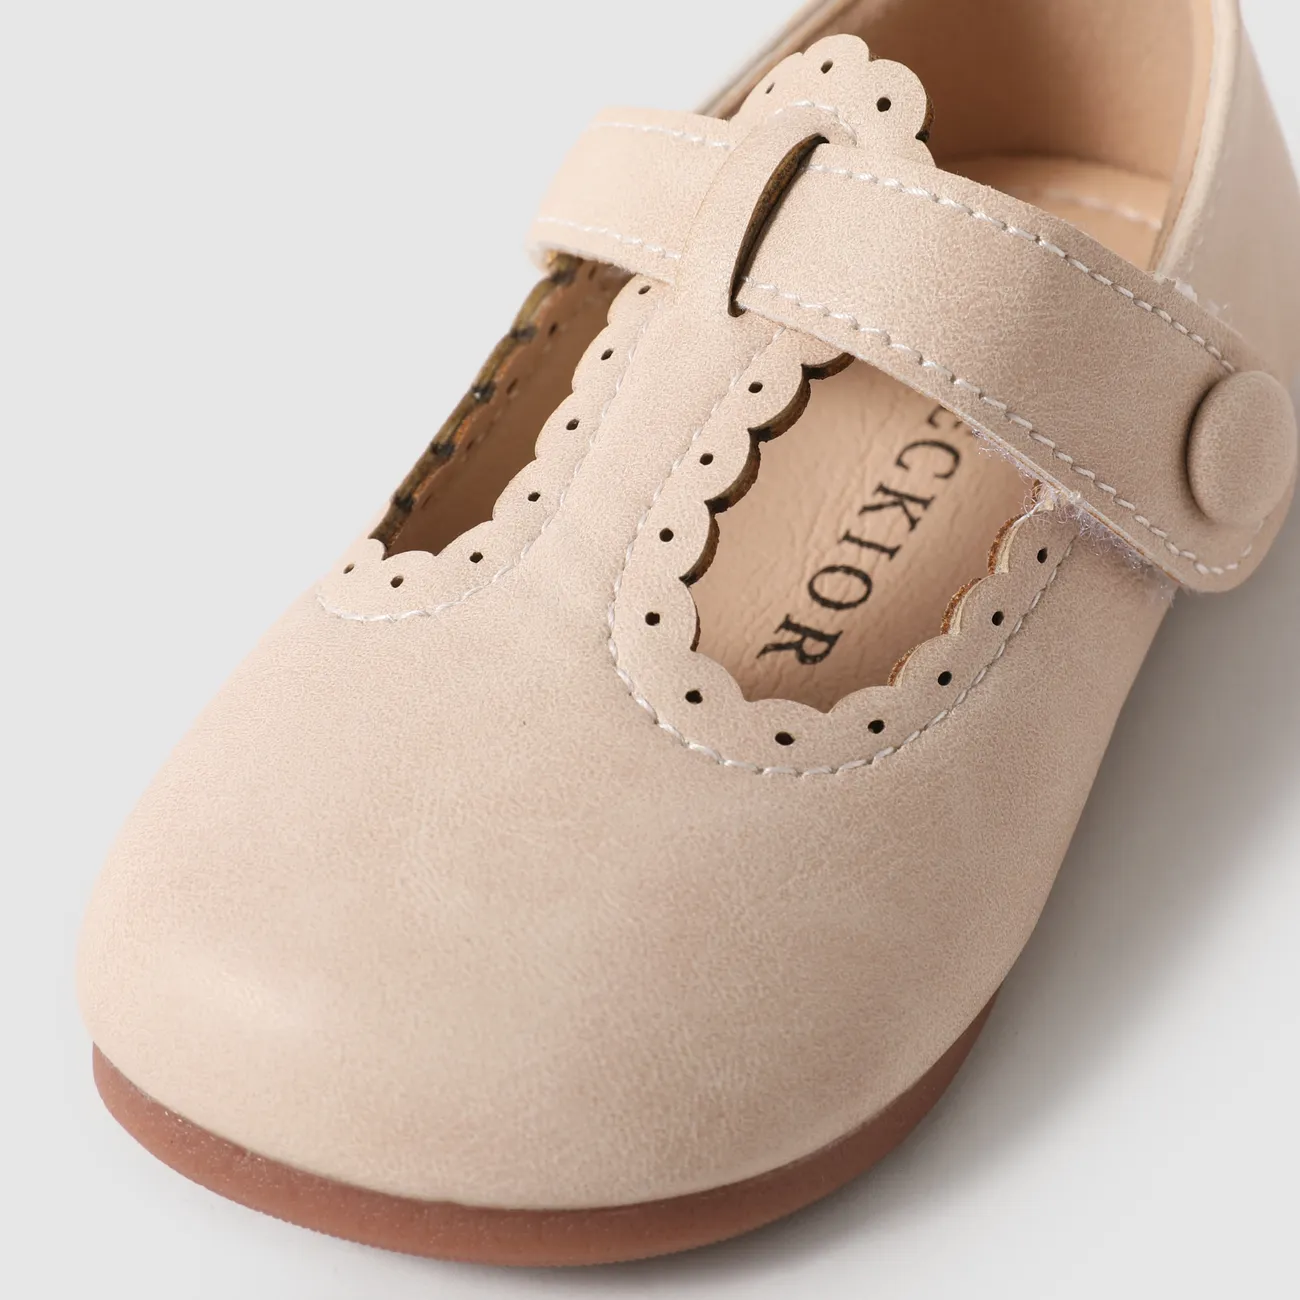 Toddler/Kids Girl Casual Solid Velcro Leather Shoes Beige big image 1